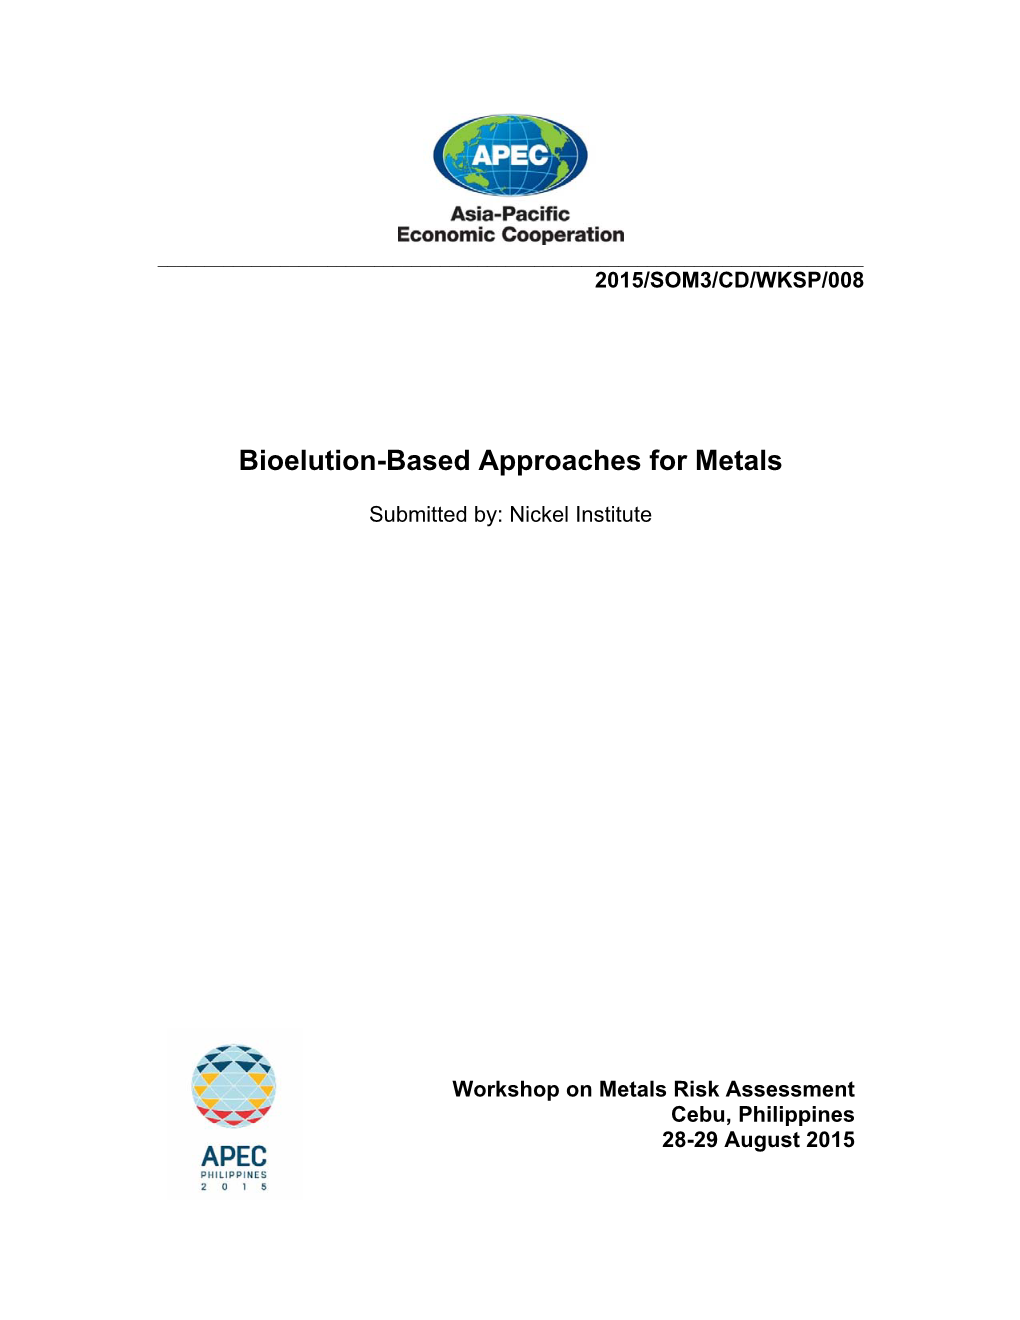 Bioelution-Based Approaches for Metals